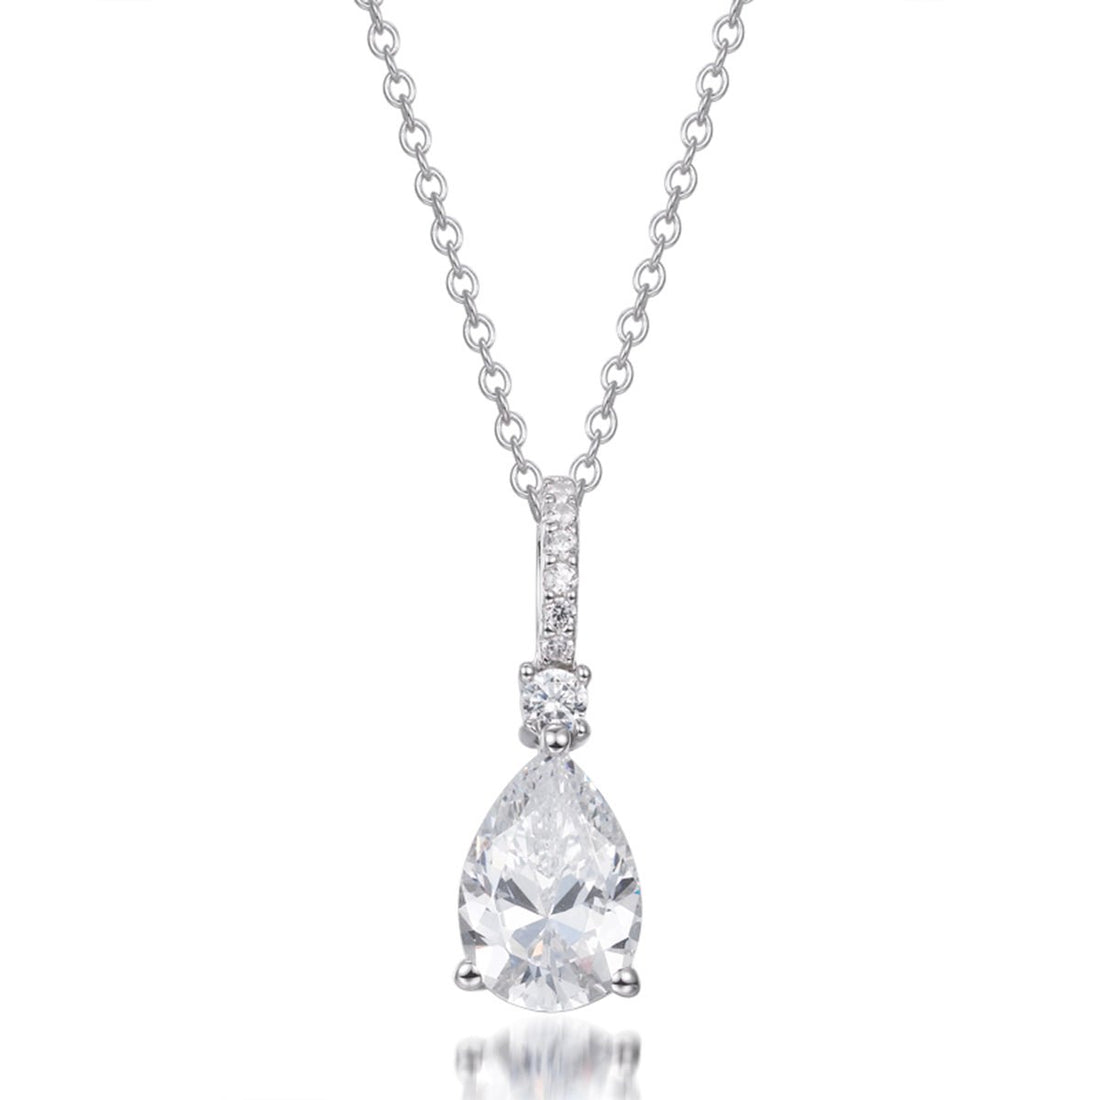 11.0ct Cubic Zirconia Pear Drop Pendant in Rhodium Plated Silver